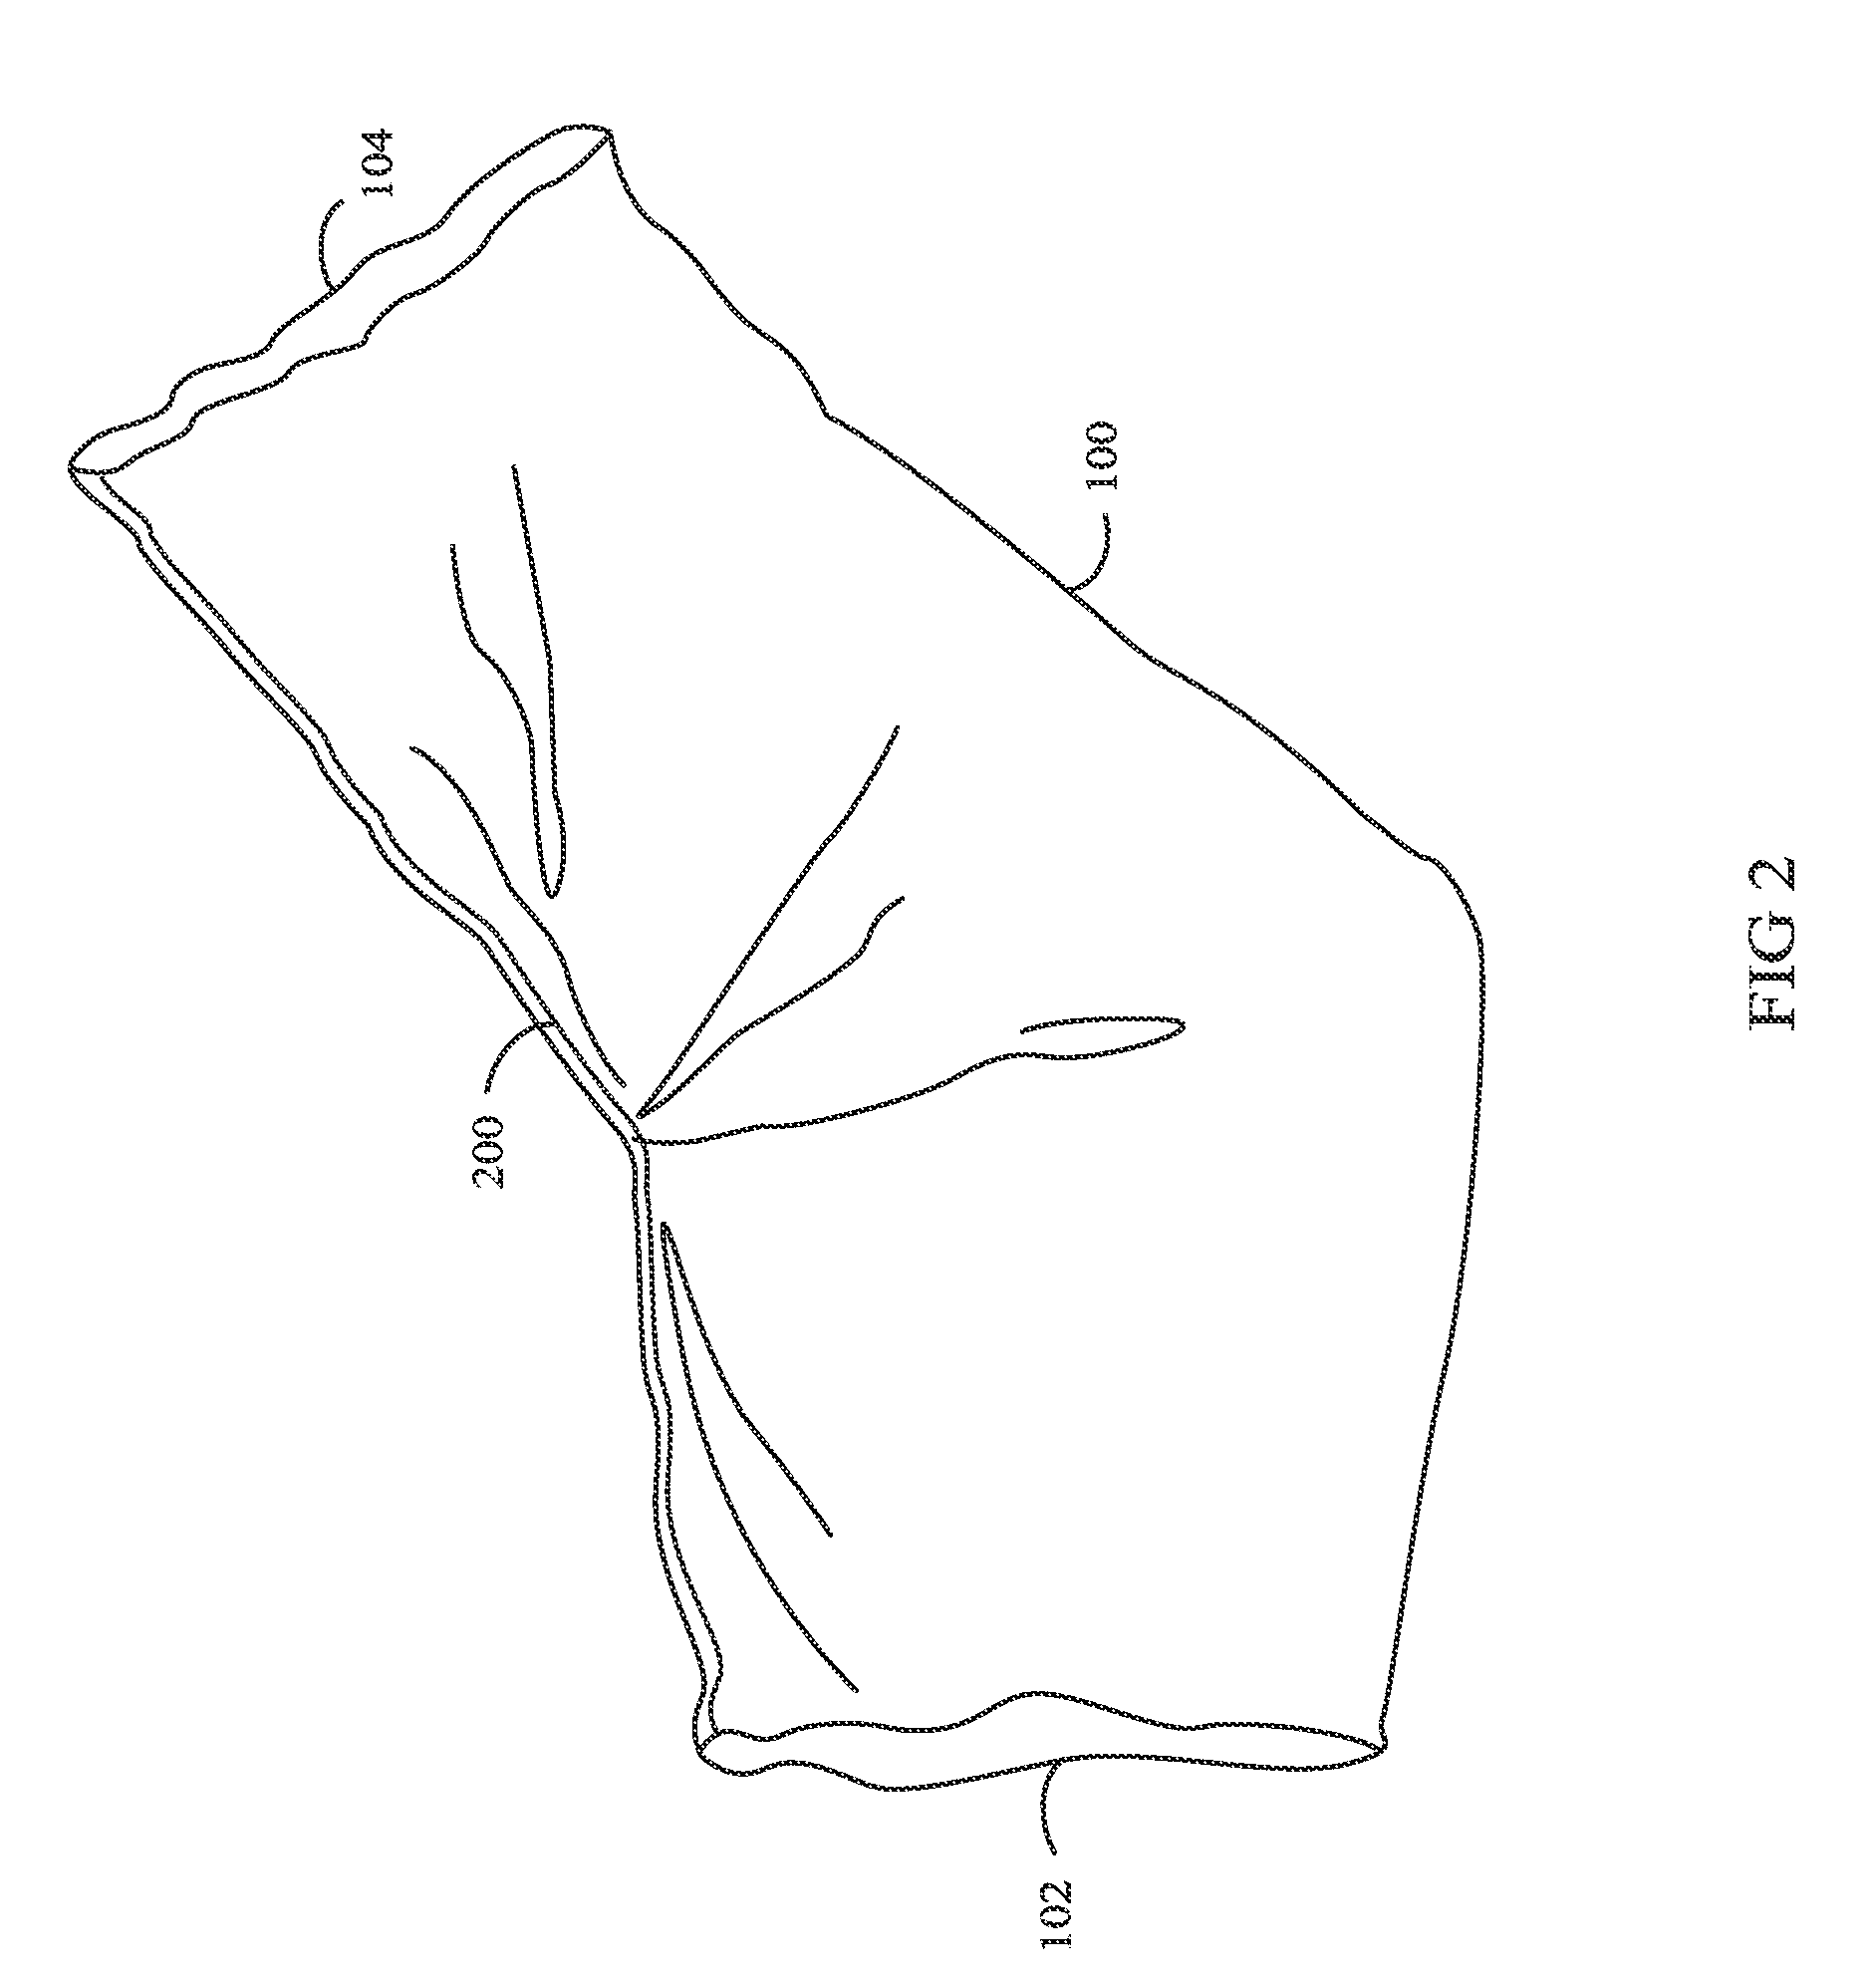 Removable Sleeve for Facilitating the Application of Compression Stockings